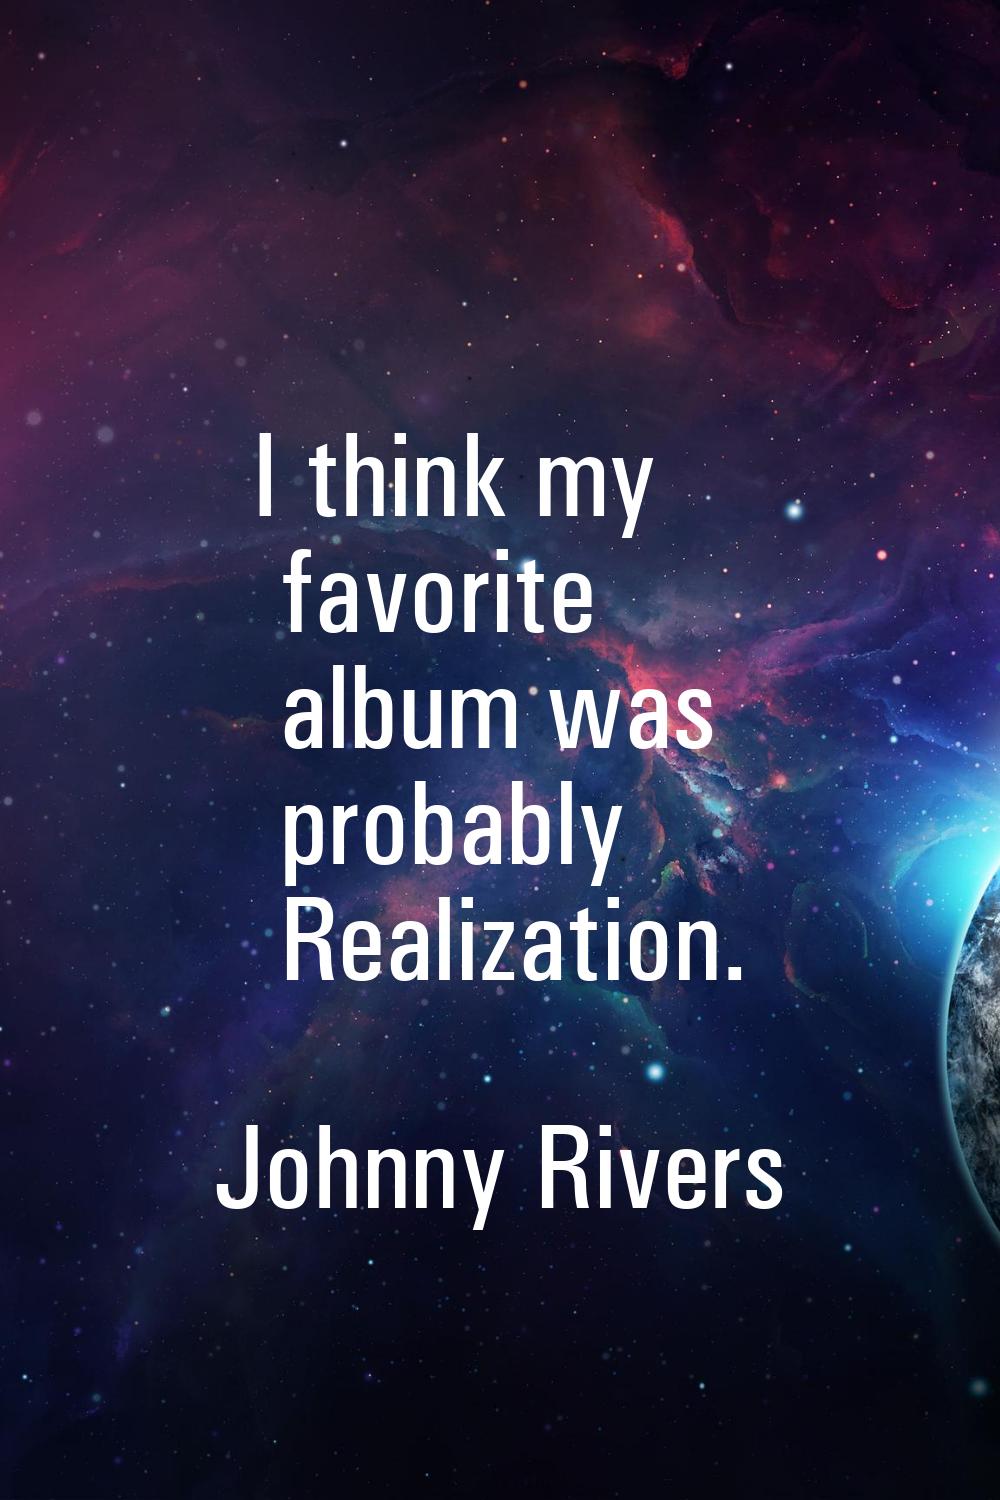 I think my favorite album was probably Realization.